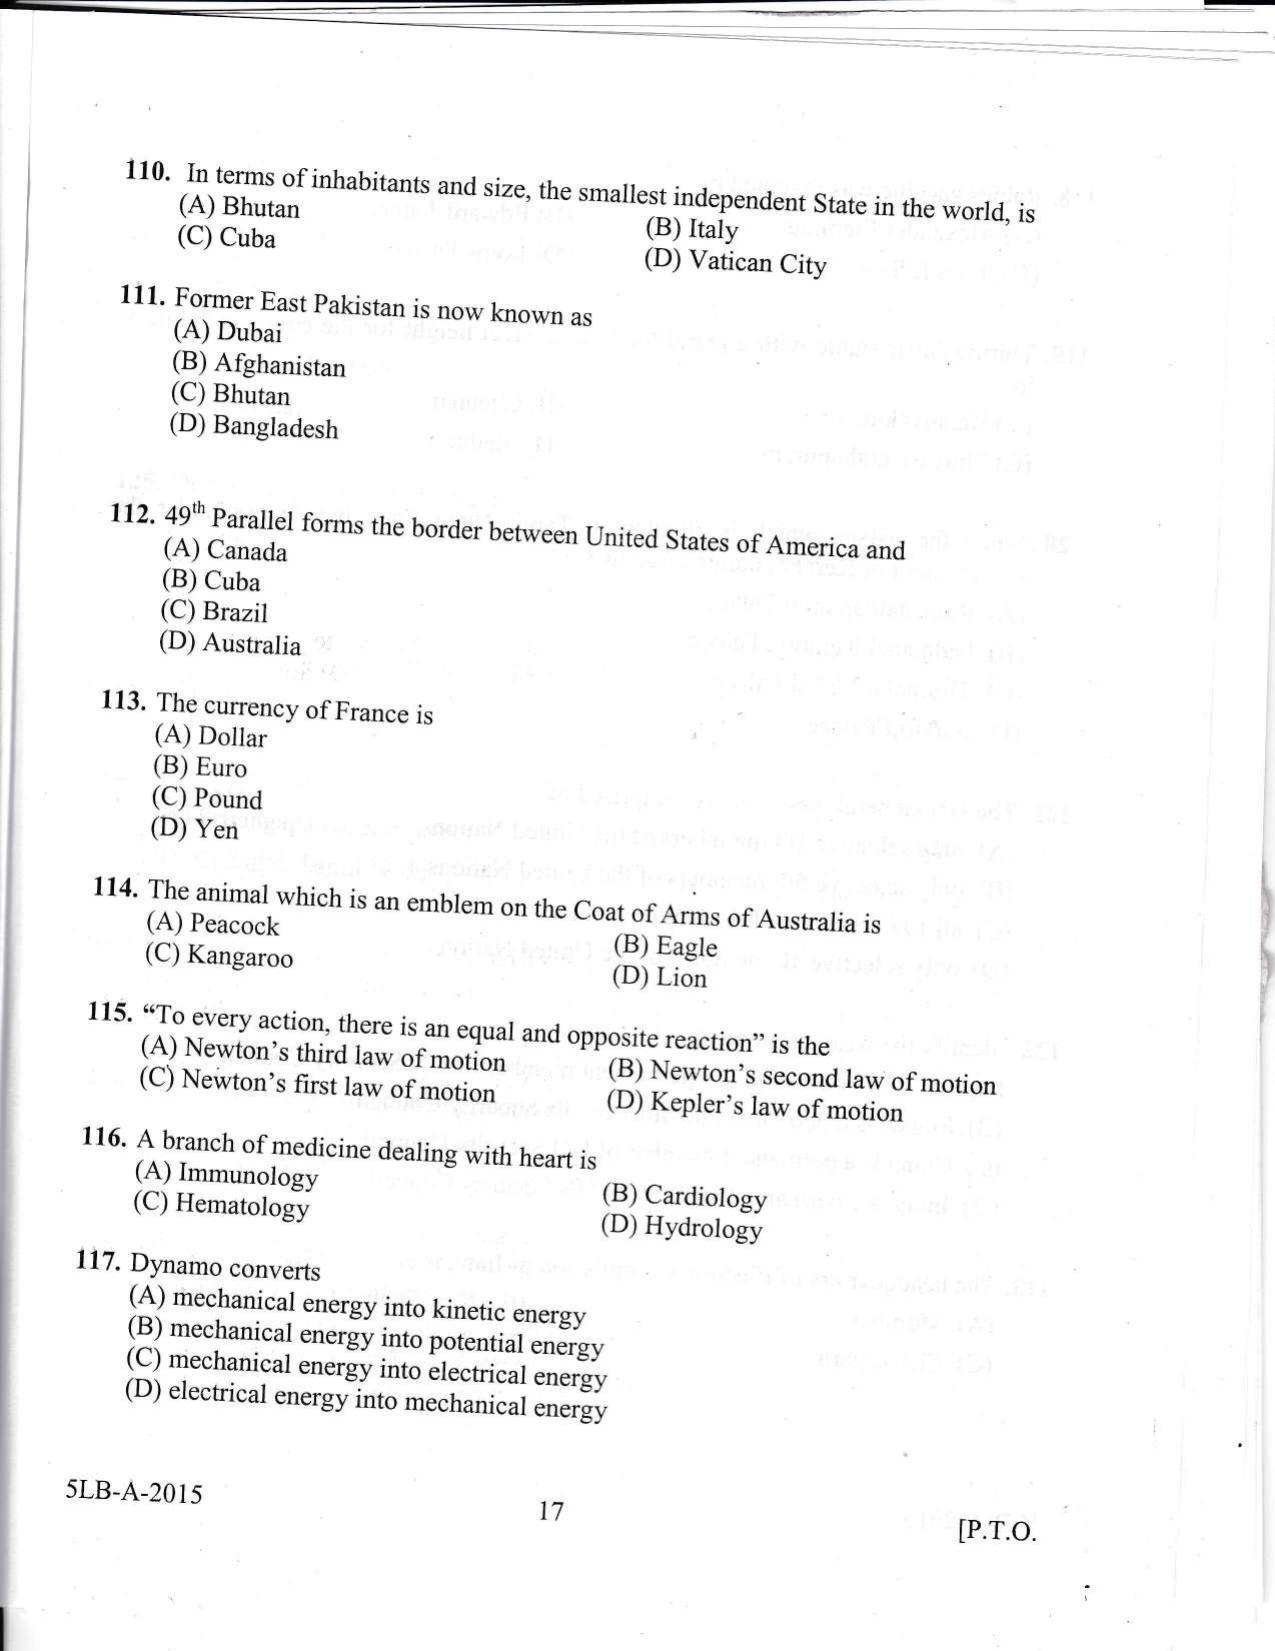 KLEE 5 Year LLB Exam 2015 Question Paper - Page 17